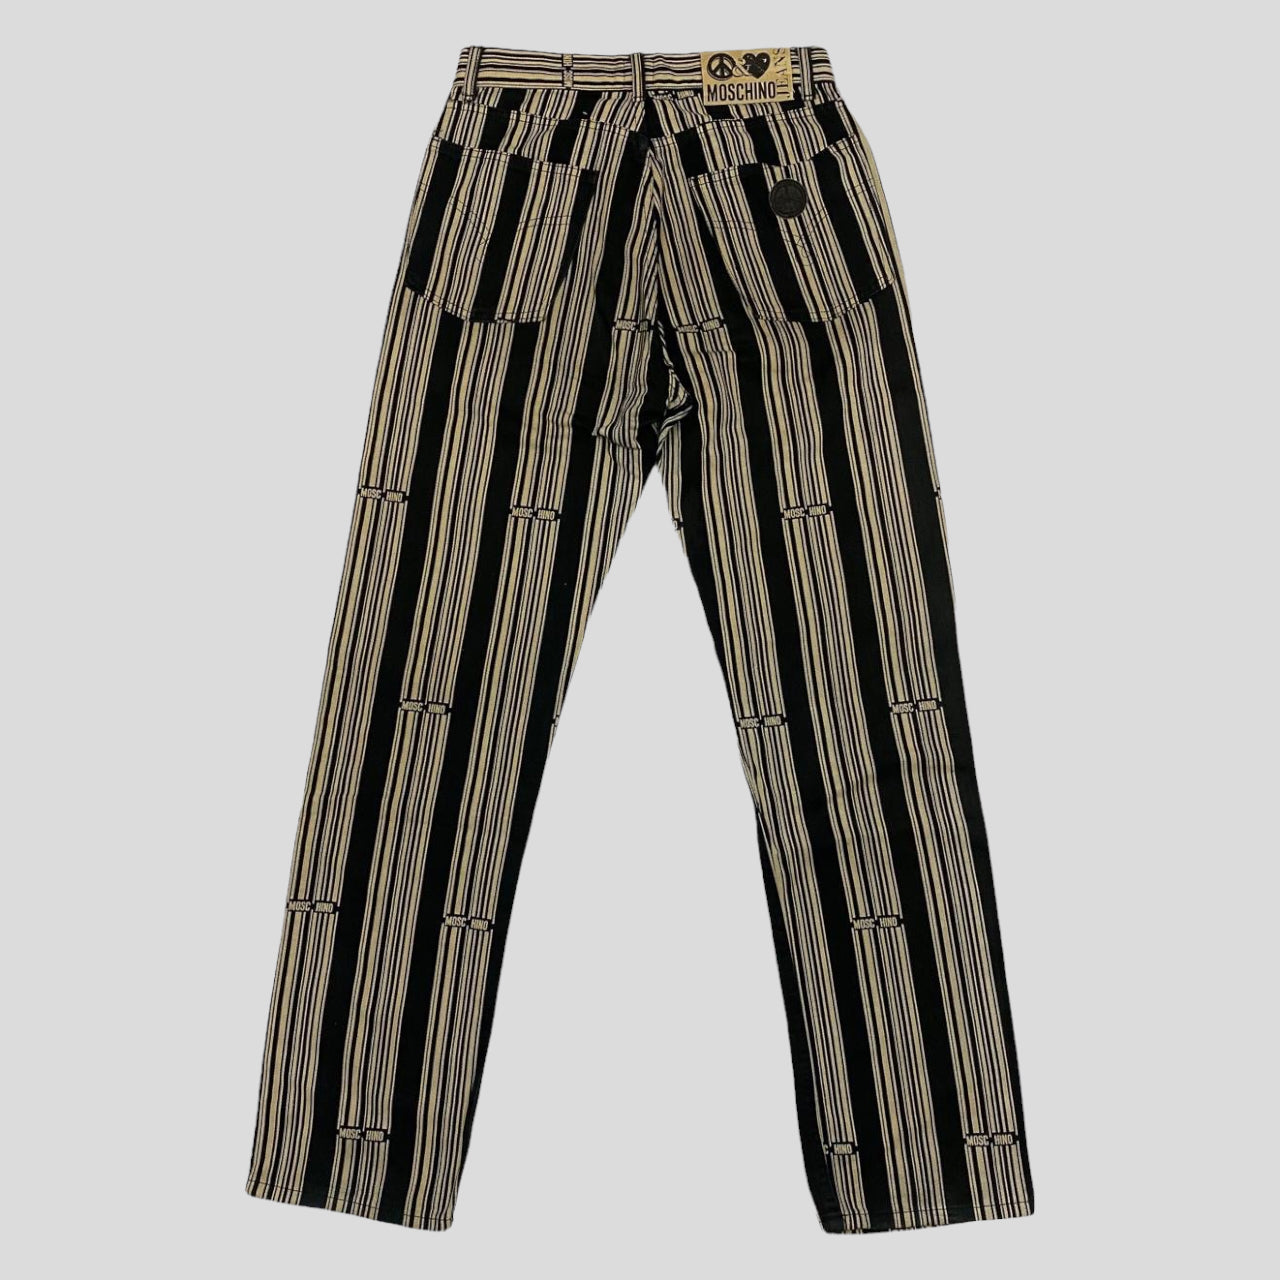 Moschino Jeans 90’s Barcode Jeans - W30